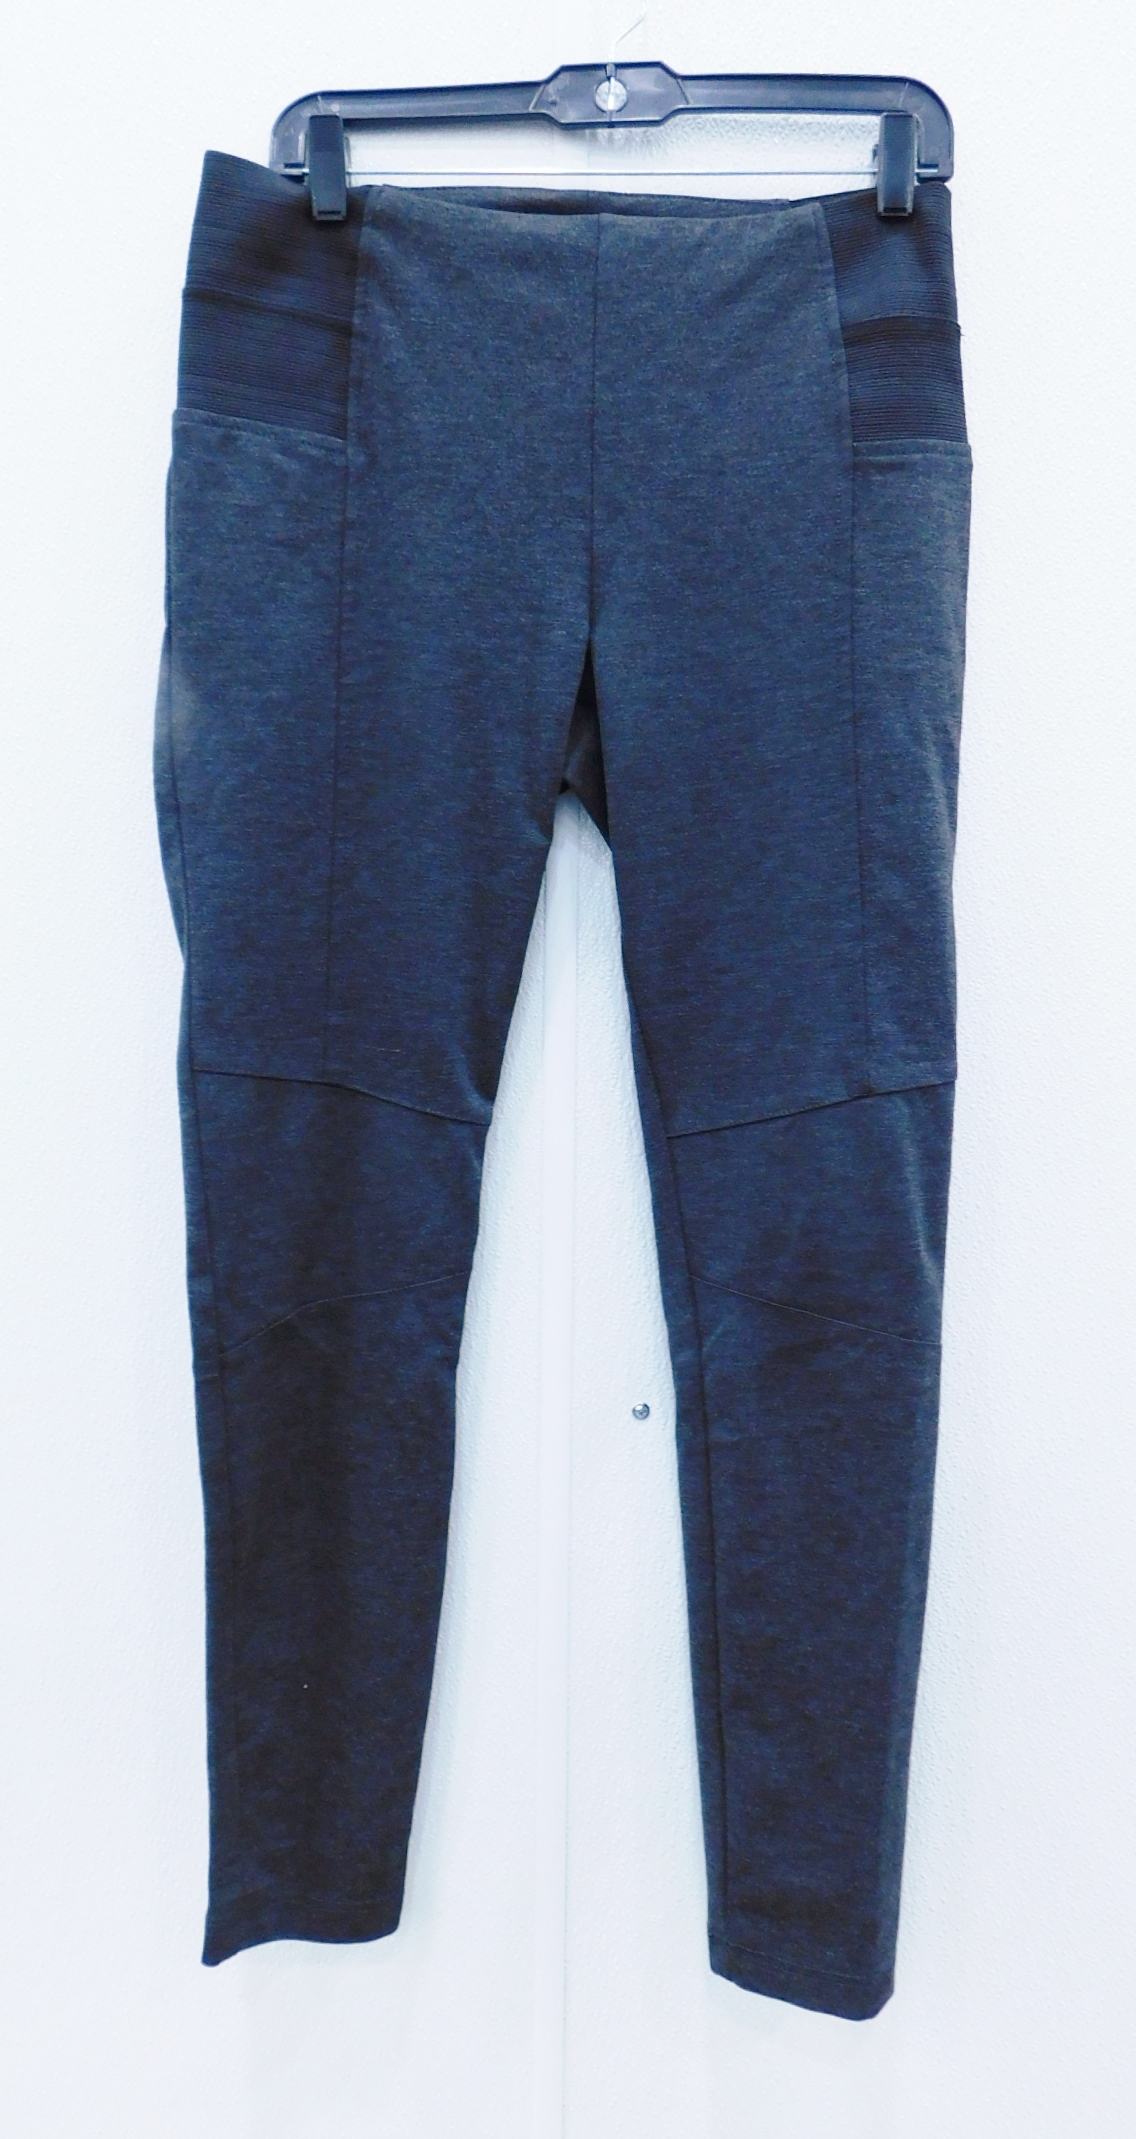 Buy the Women's Kut From The Cloth Gray Leggings Size L | GoodwillFinds